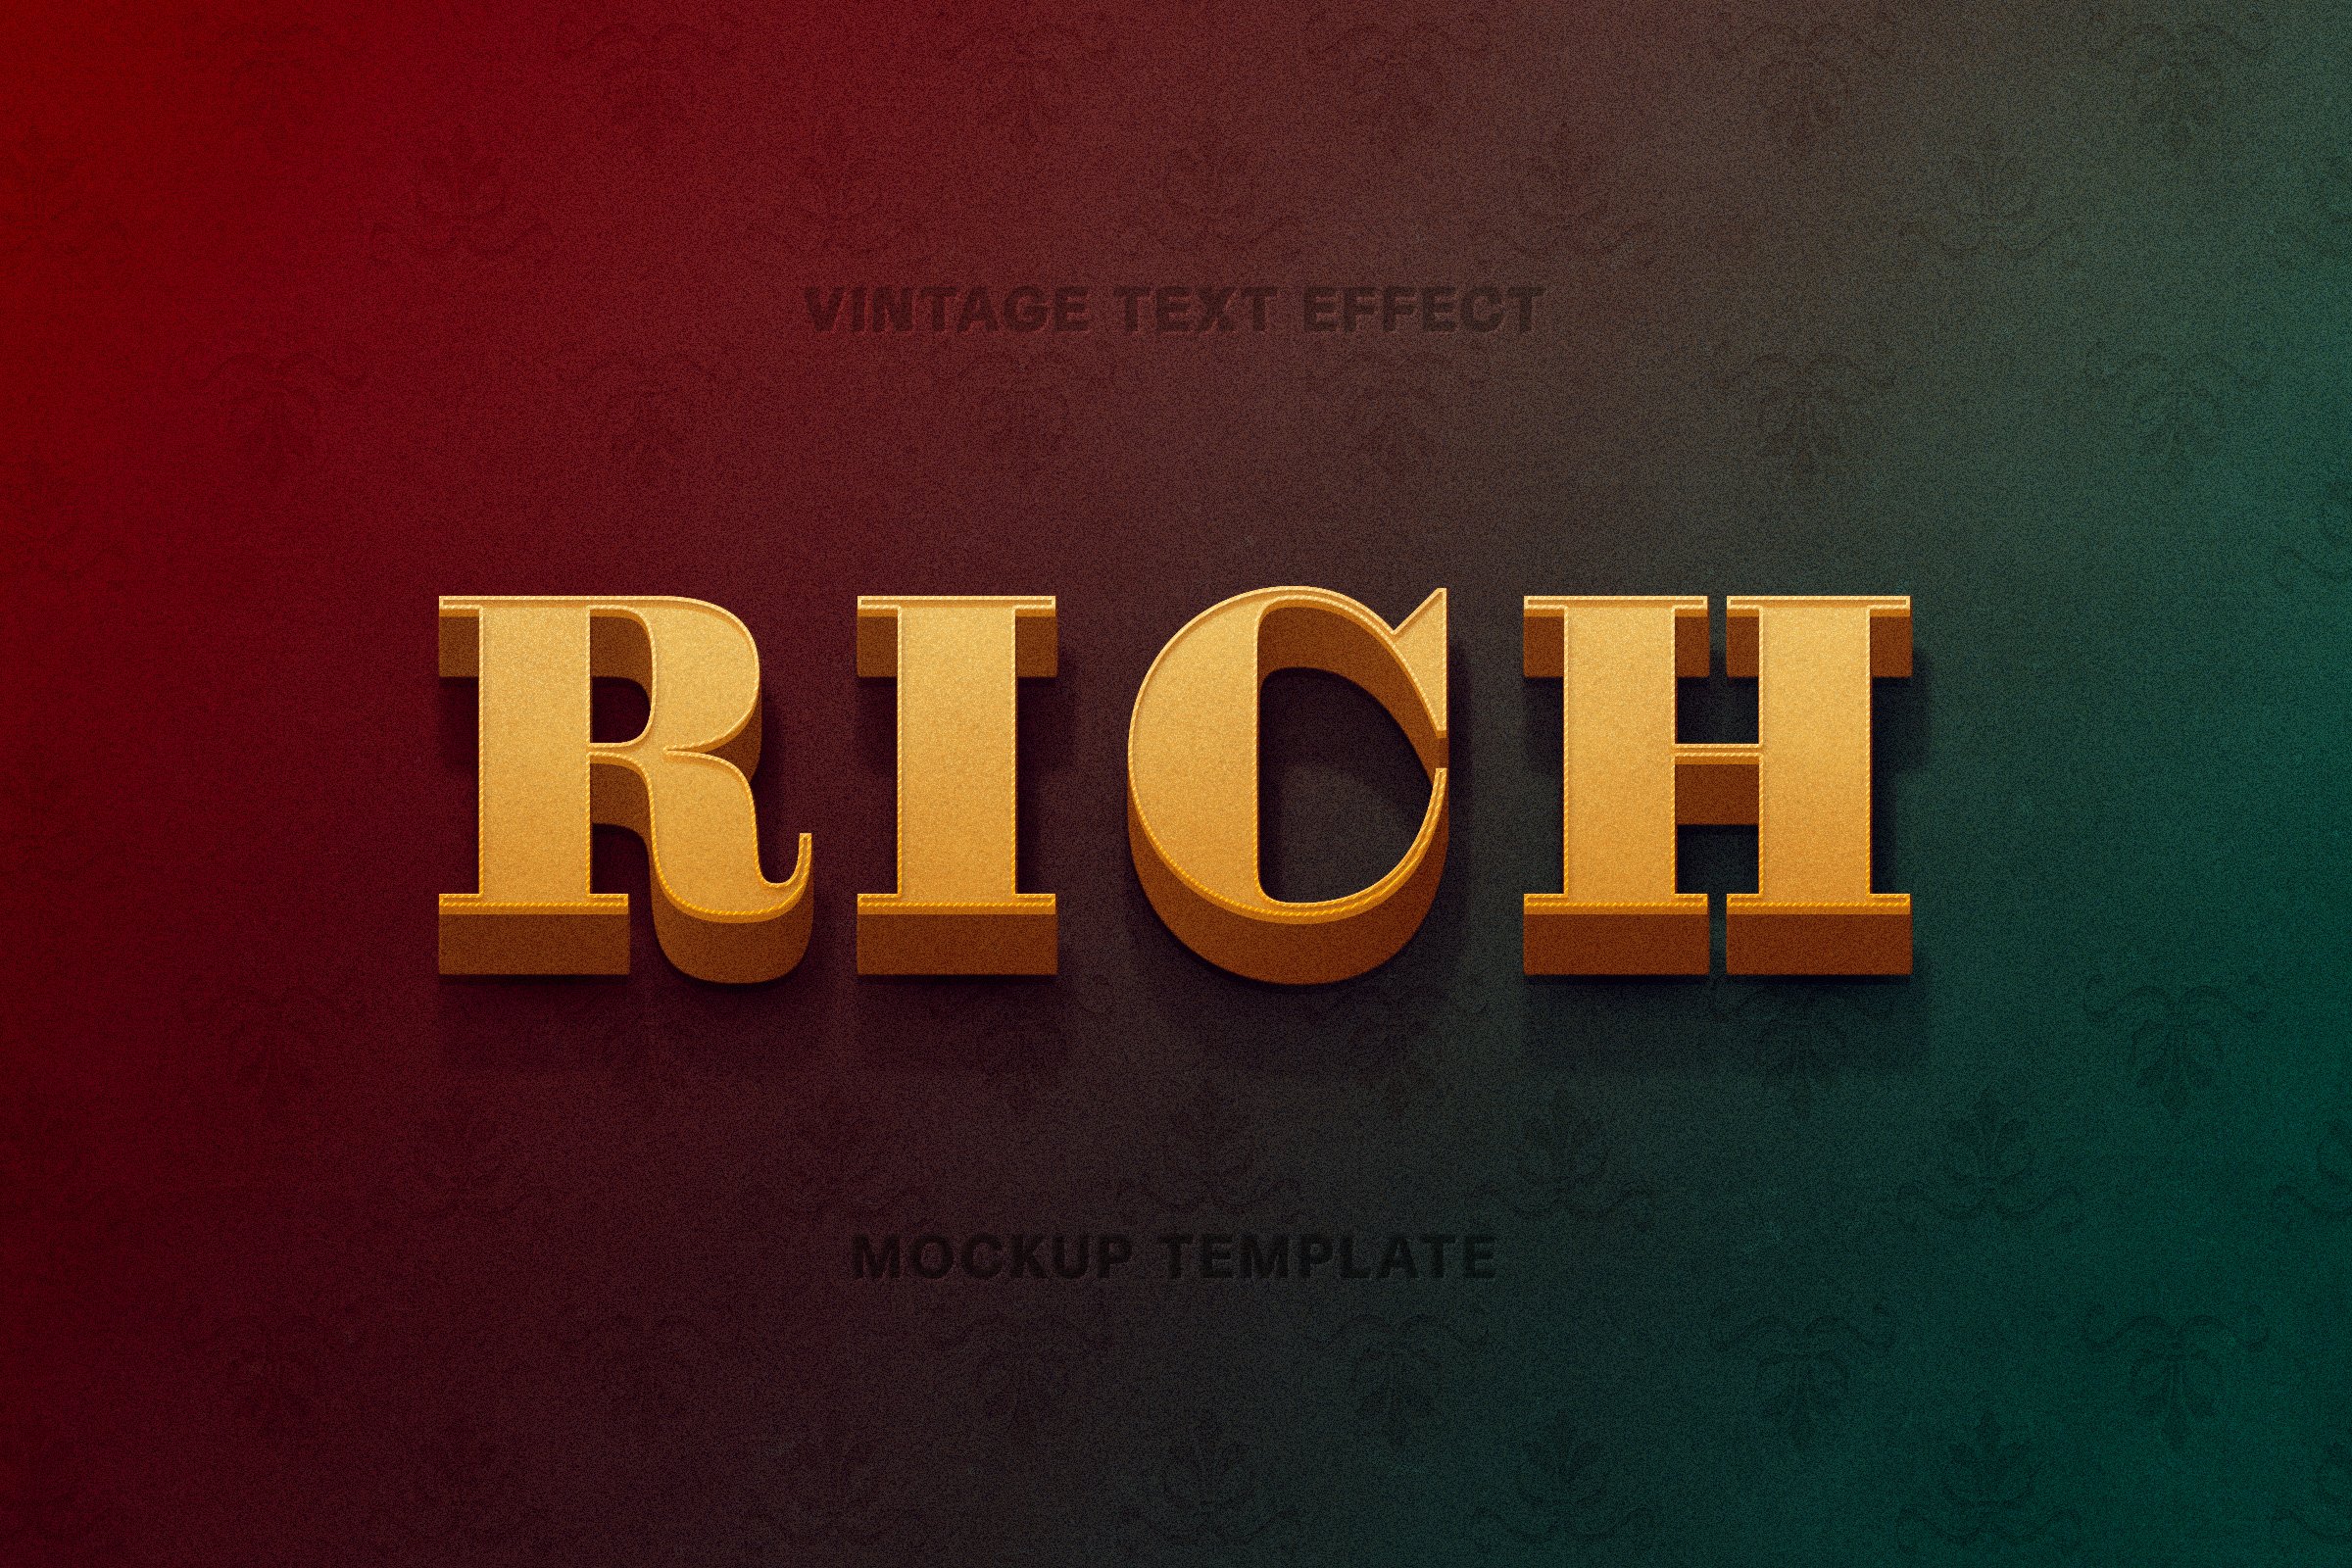 Vintage Text Effectcover image.